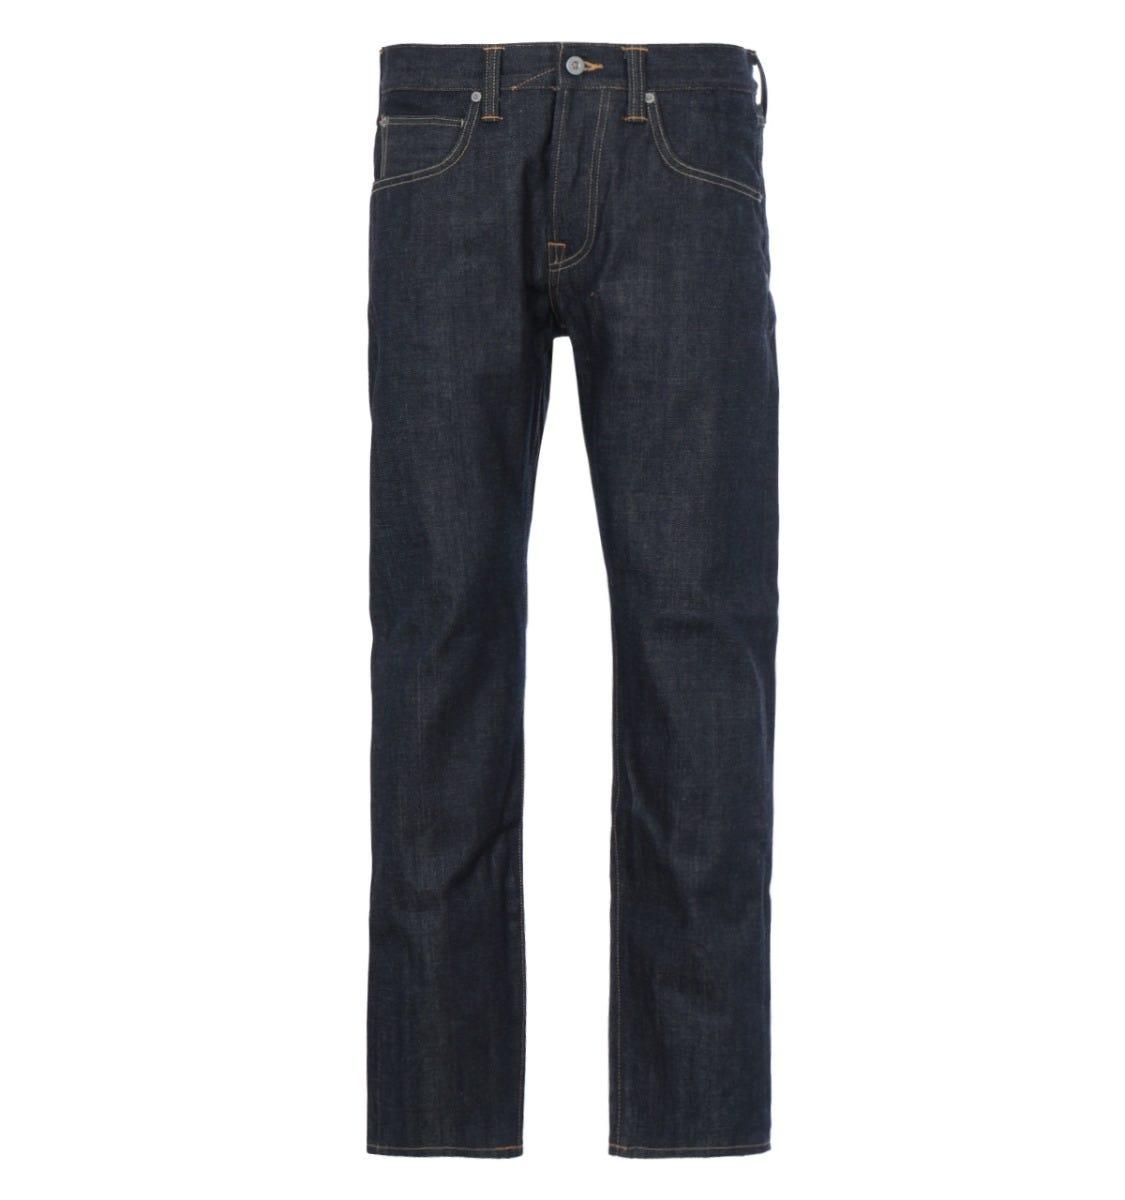 JEANS EDWIN HOMME ED 71 REGULAR W28  L32 VAL170€ red listed selvage-unwashed